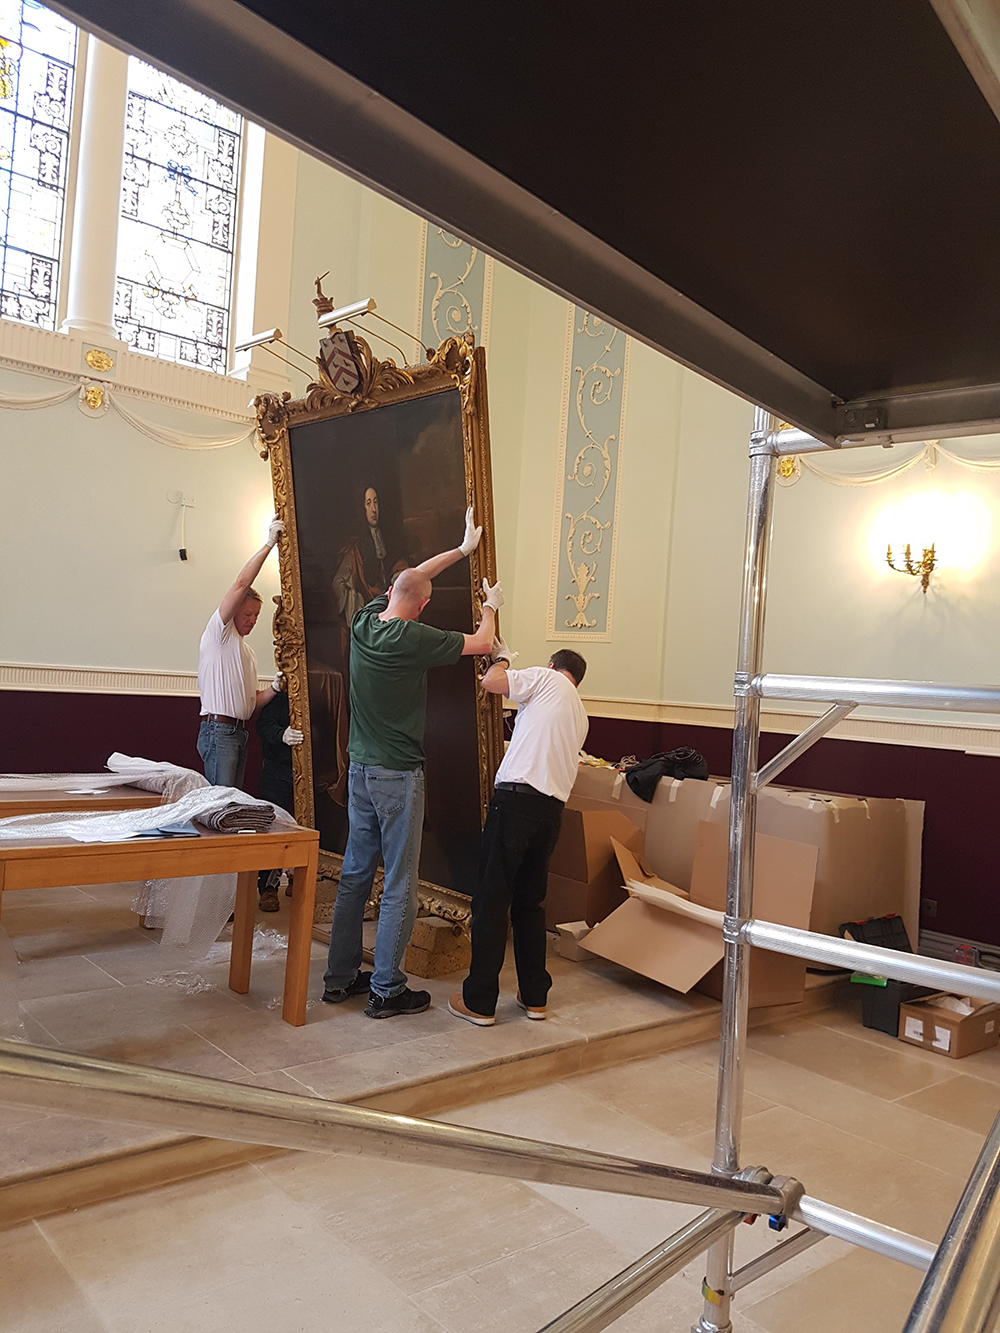 worcester college oxford picture lights by hogarth paintings being hung